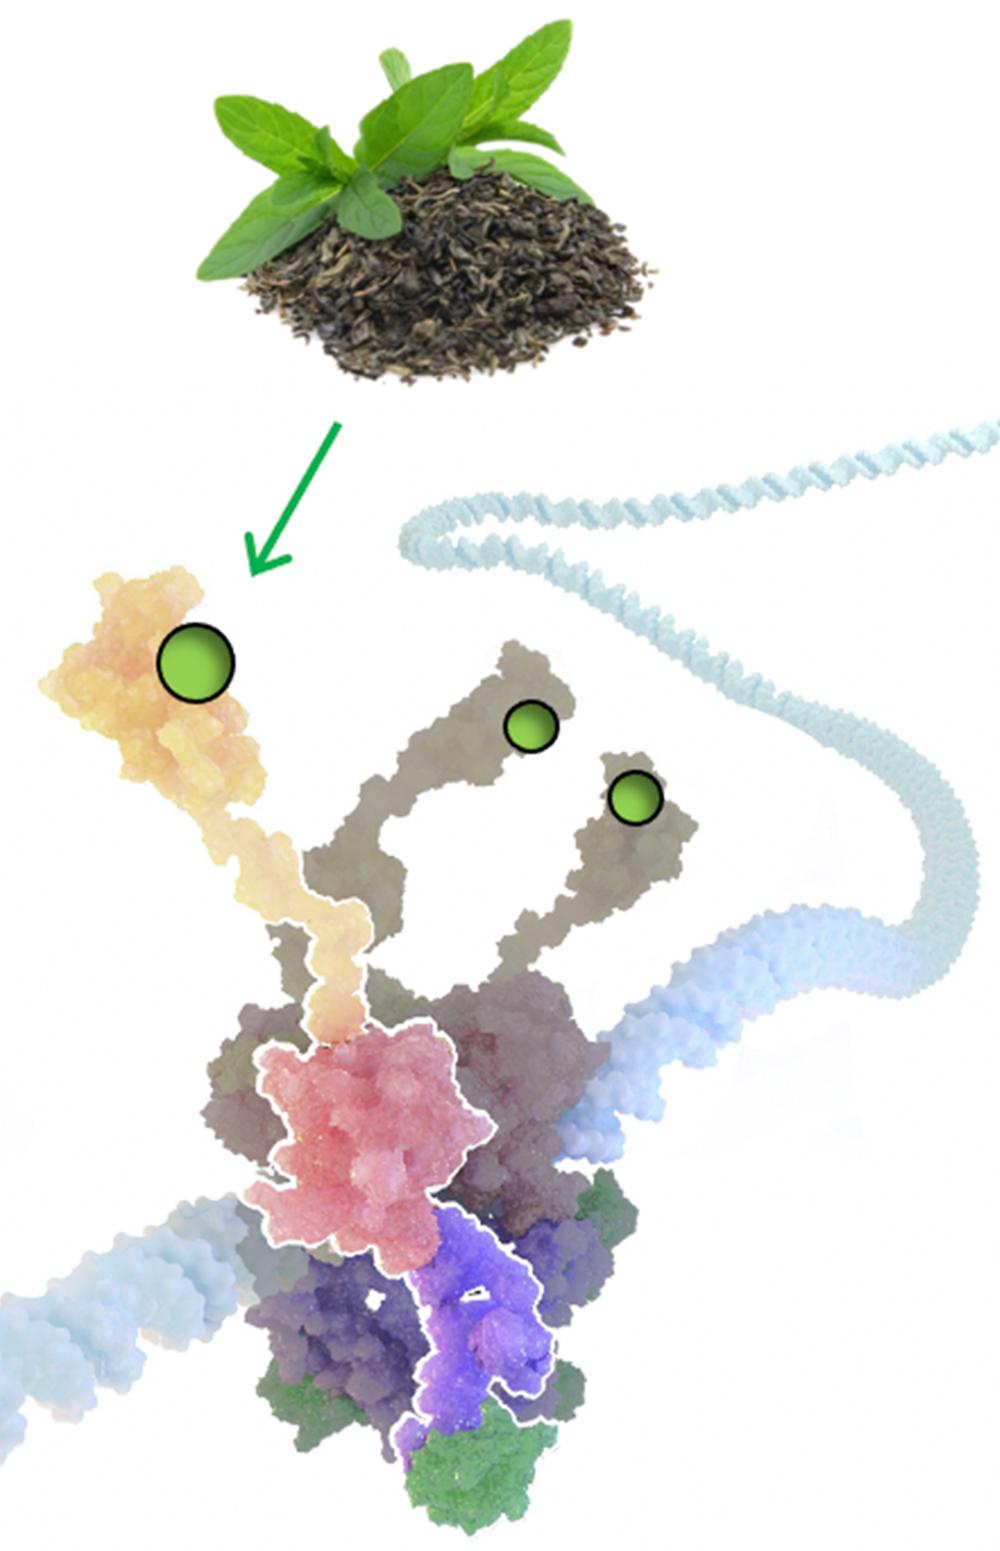 A model of the p53 tumor suppressor binding to DNA and activating genes that defend against cancer. Green tea (top) contains the compound EGCG, which binds to p53 and helps it resist being degraded by cancer cells.